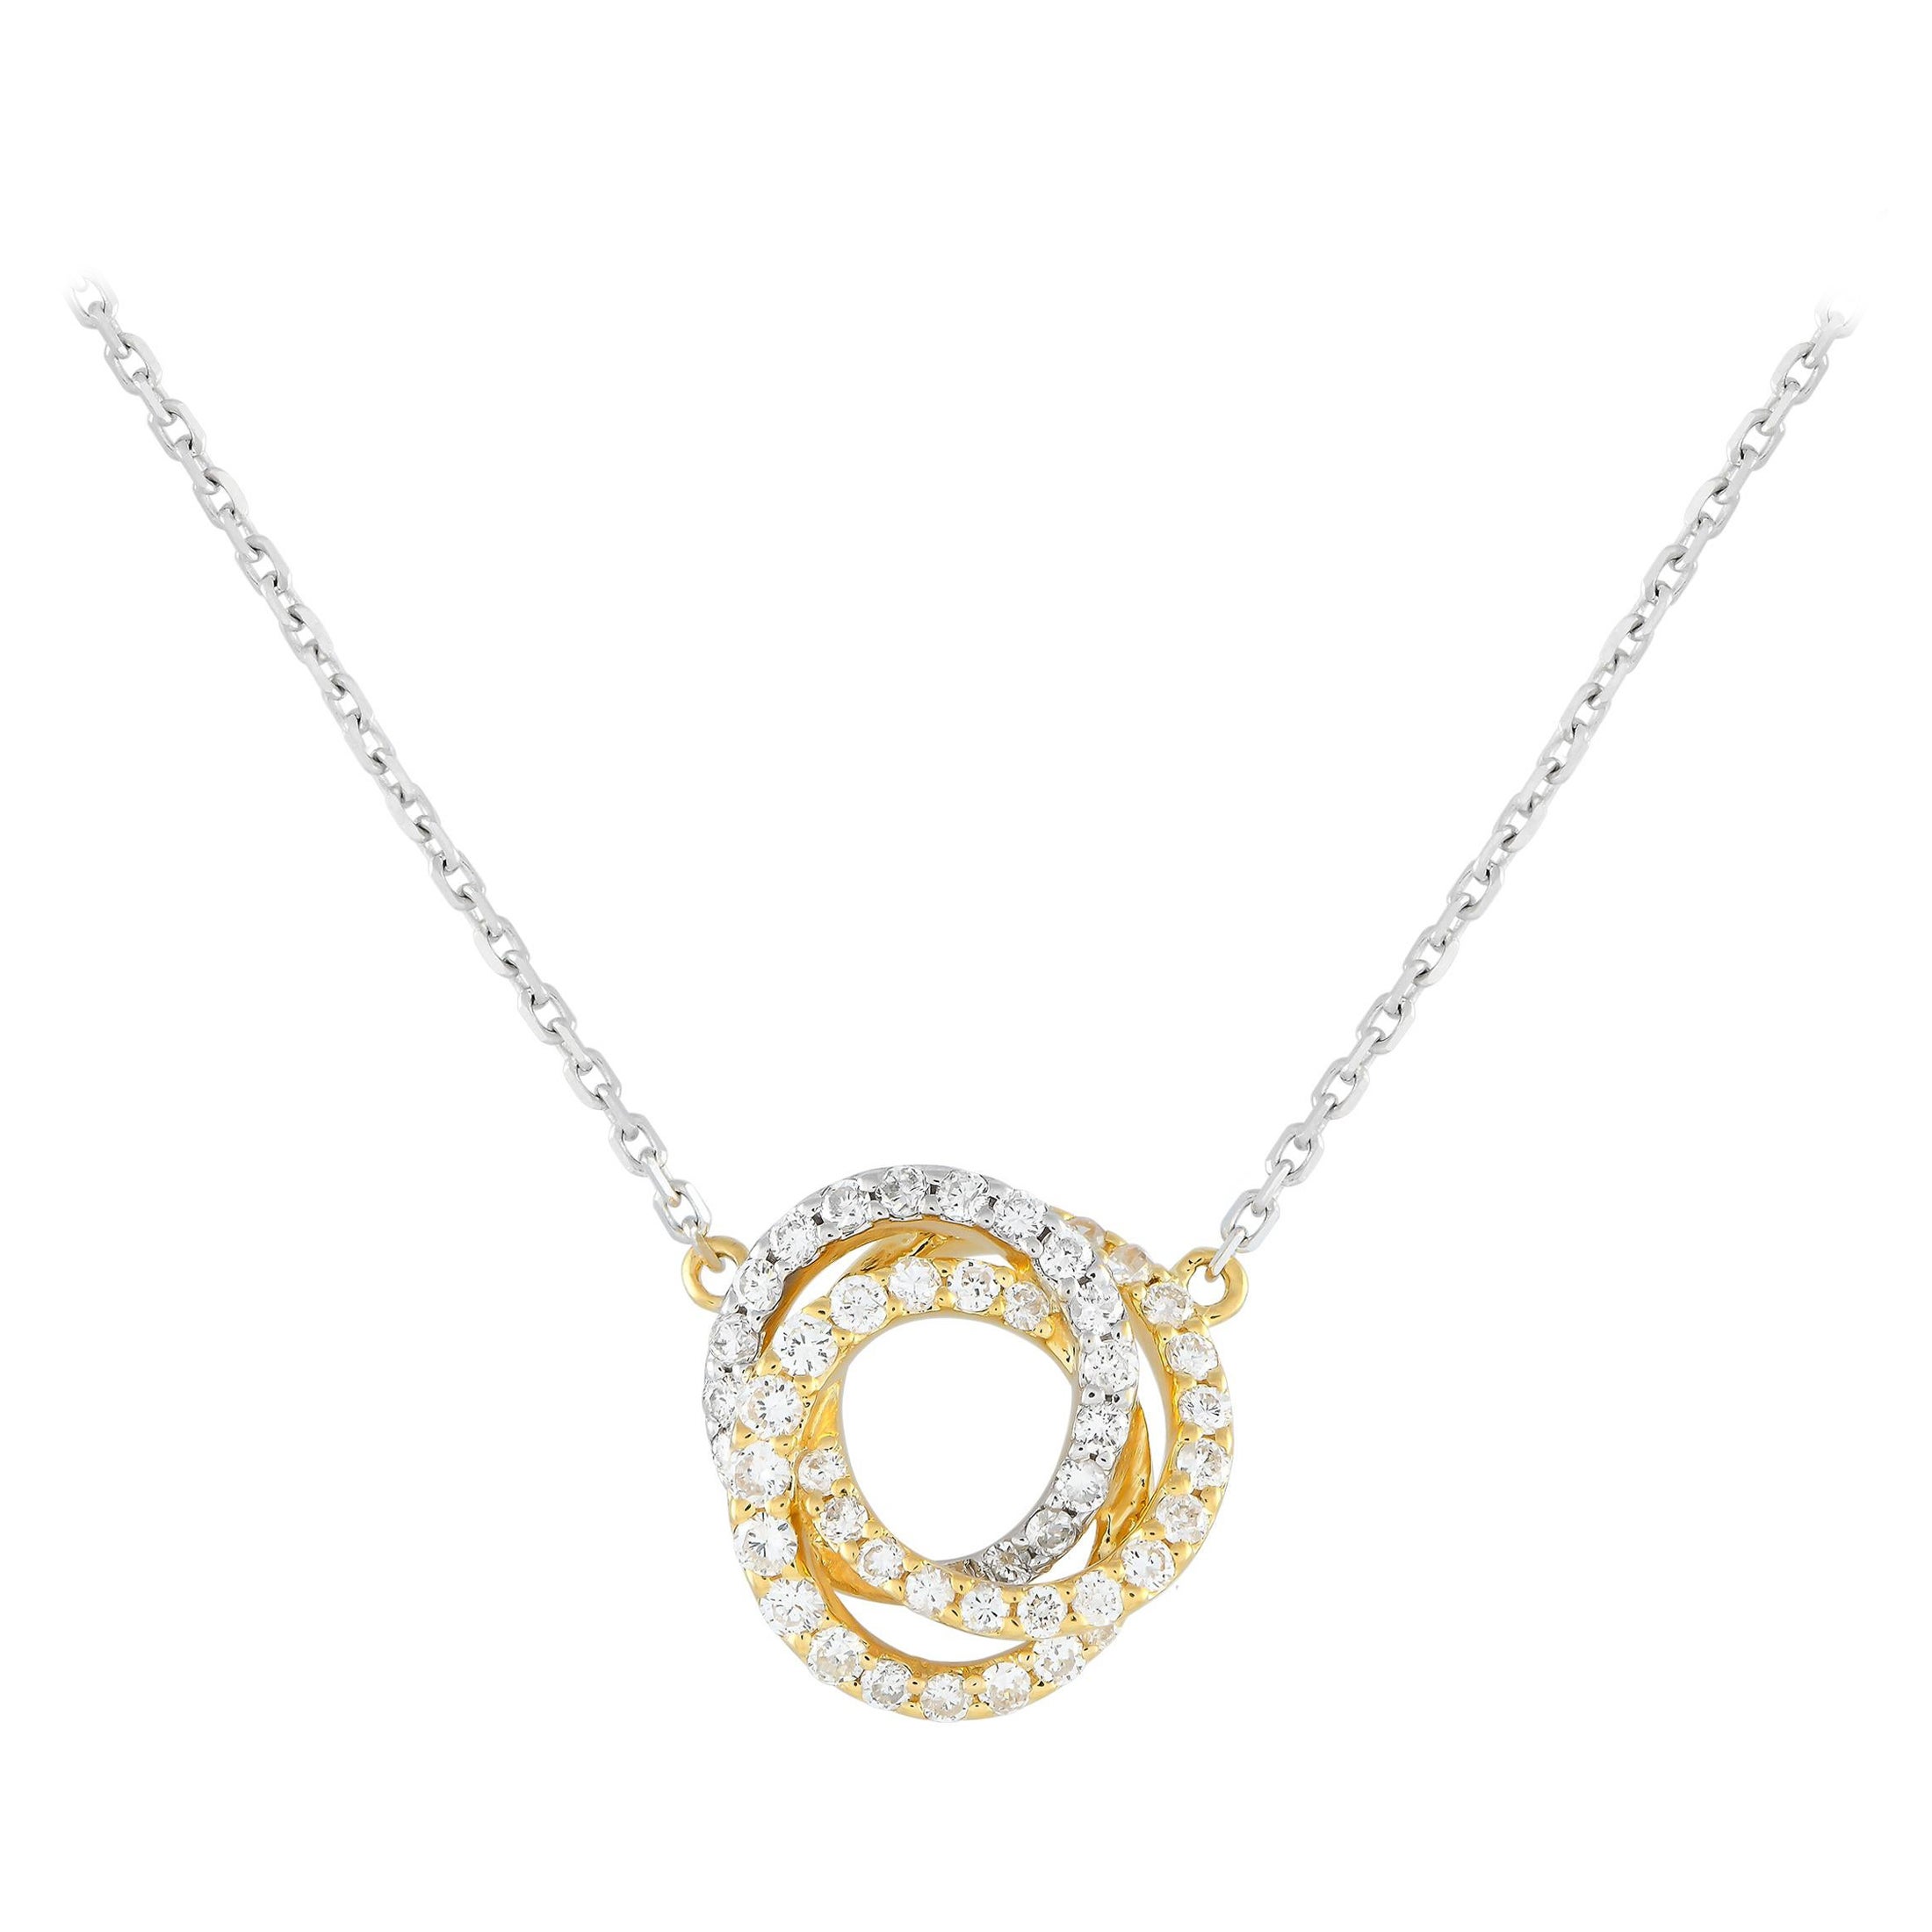 18K White and Yellow Gold 0.50ct Diamond Triple Ring Necklace ANK-13200WY For Sale